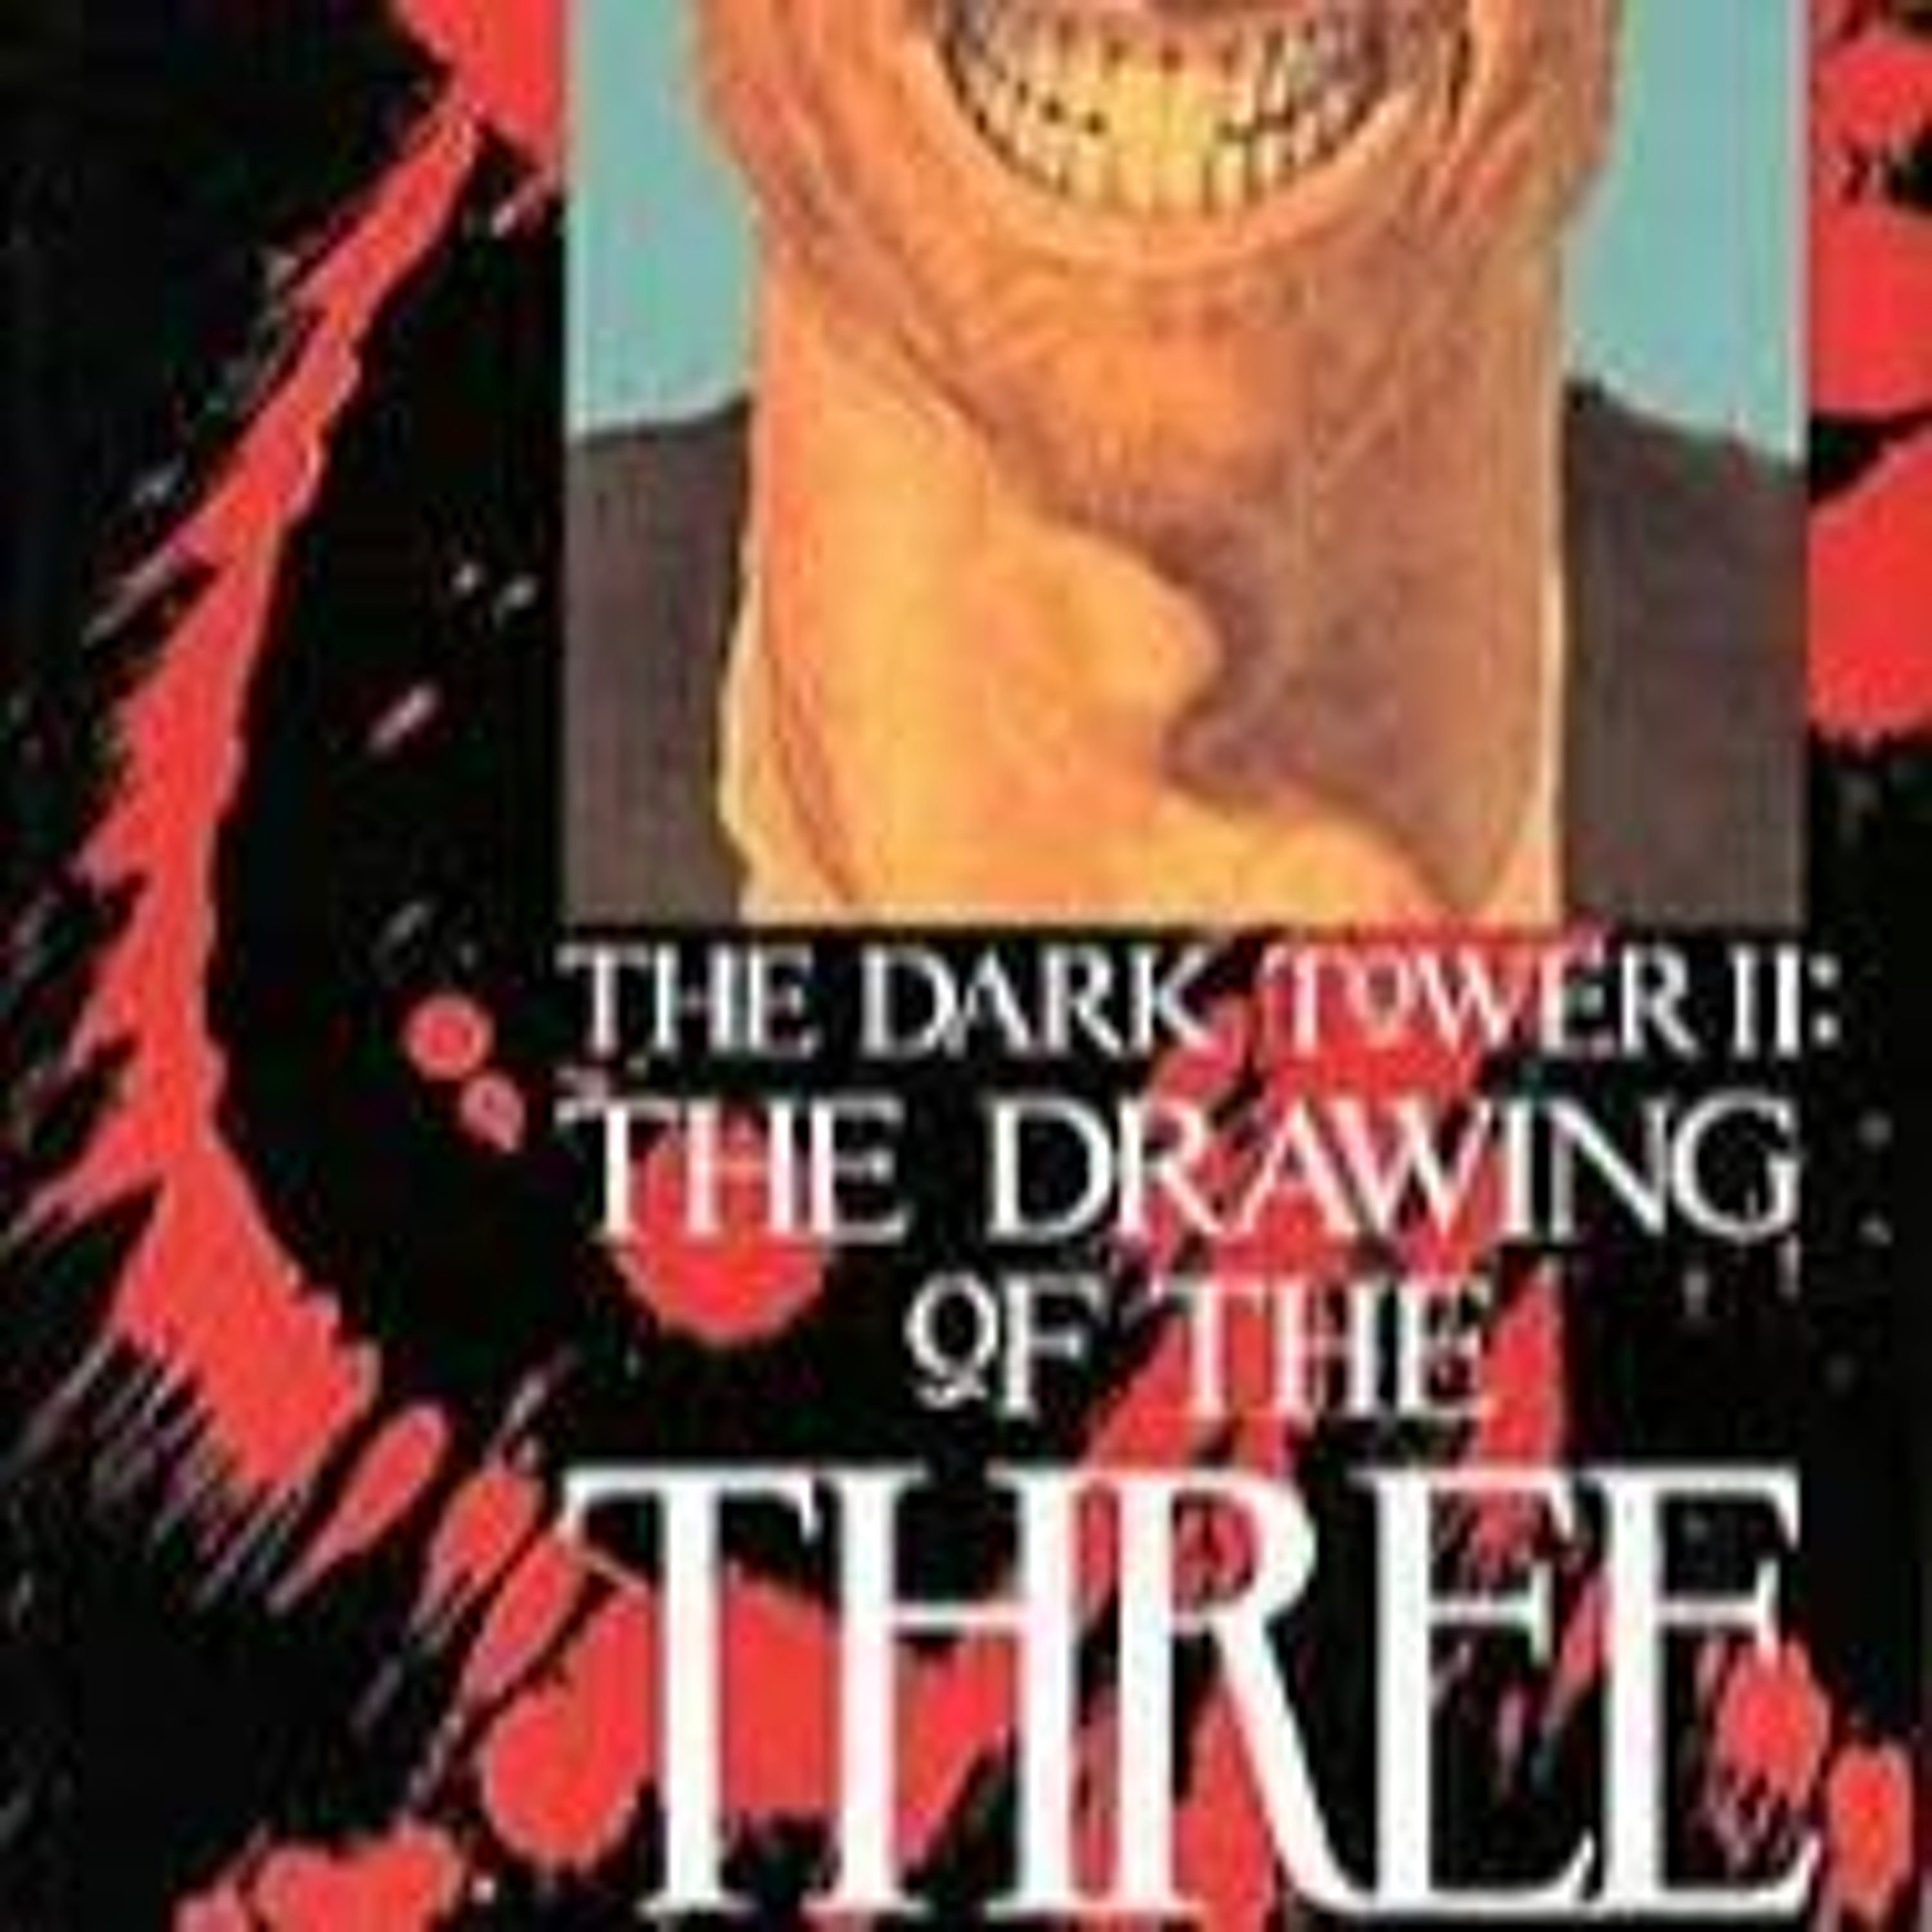 Episode 156 – The Drawing of the Three Pt. 1 - “Roland Deep Inside You”